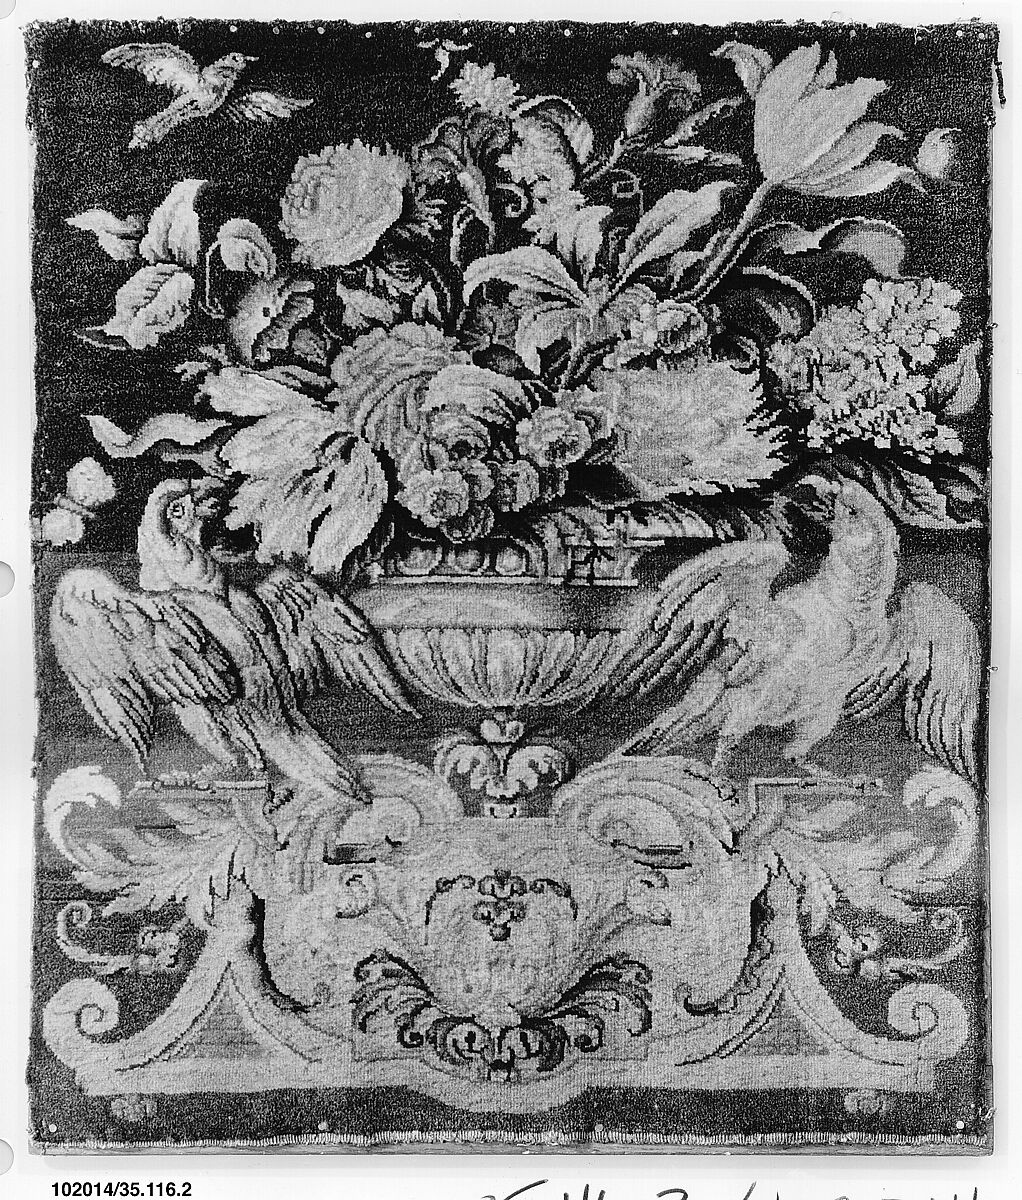 Flowers in a golden vase, with three birds, Savonnerie Manufactory (Manufactory, established 1626; Manufacture Royale, established 1663), Wool (129 knots per sq. inch, 20 per sq. cm.), French, Paris 